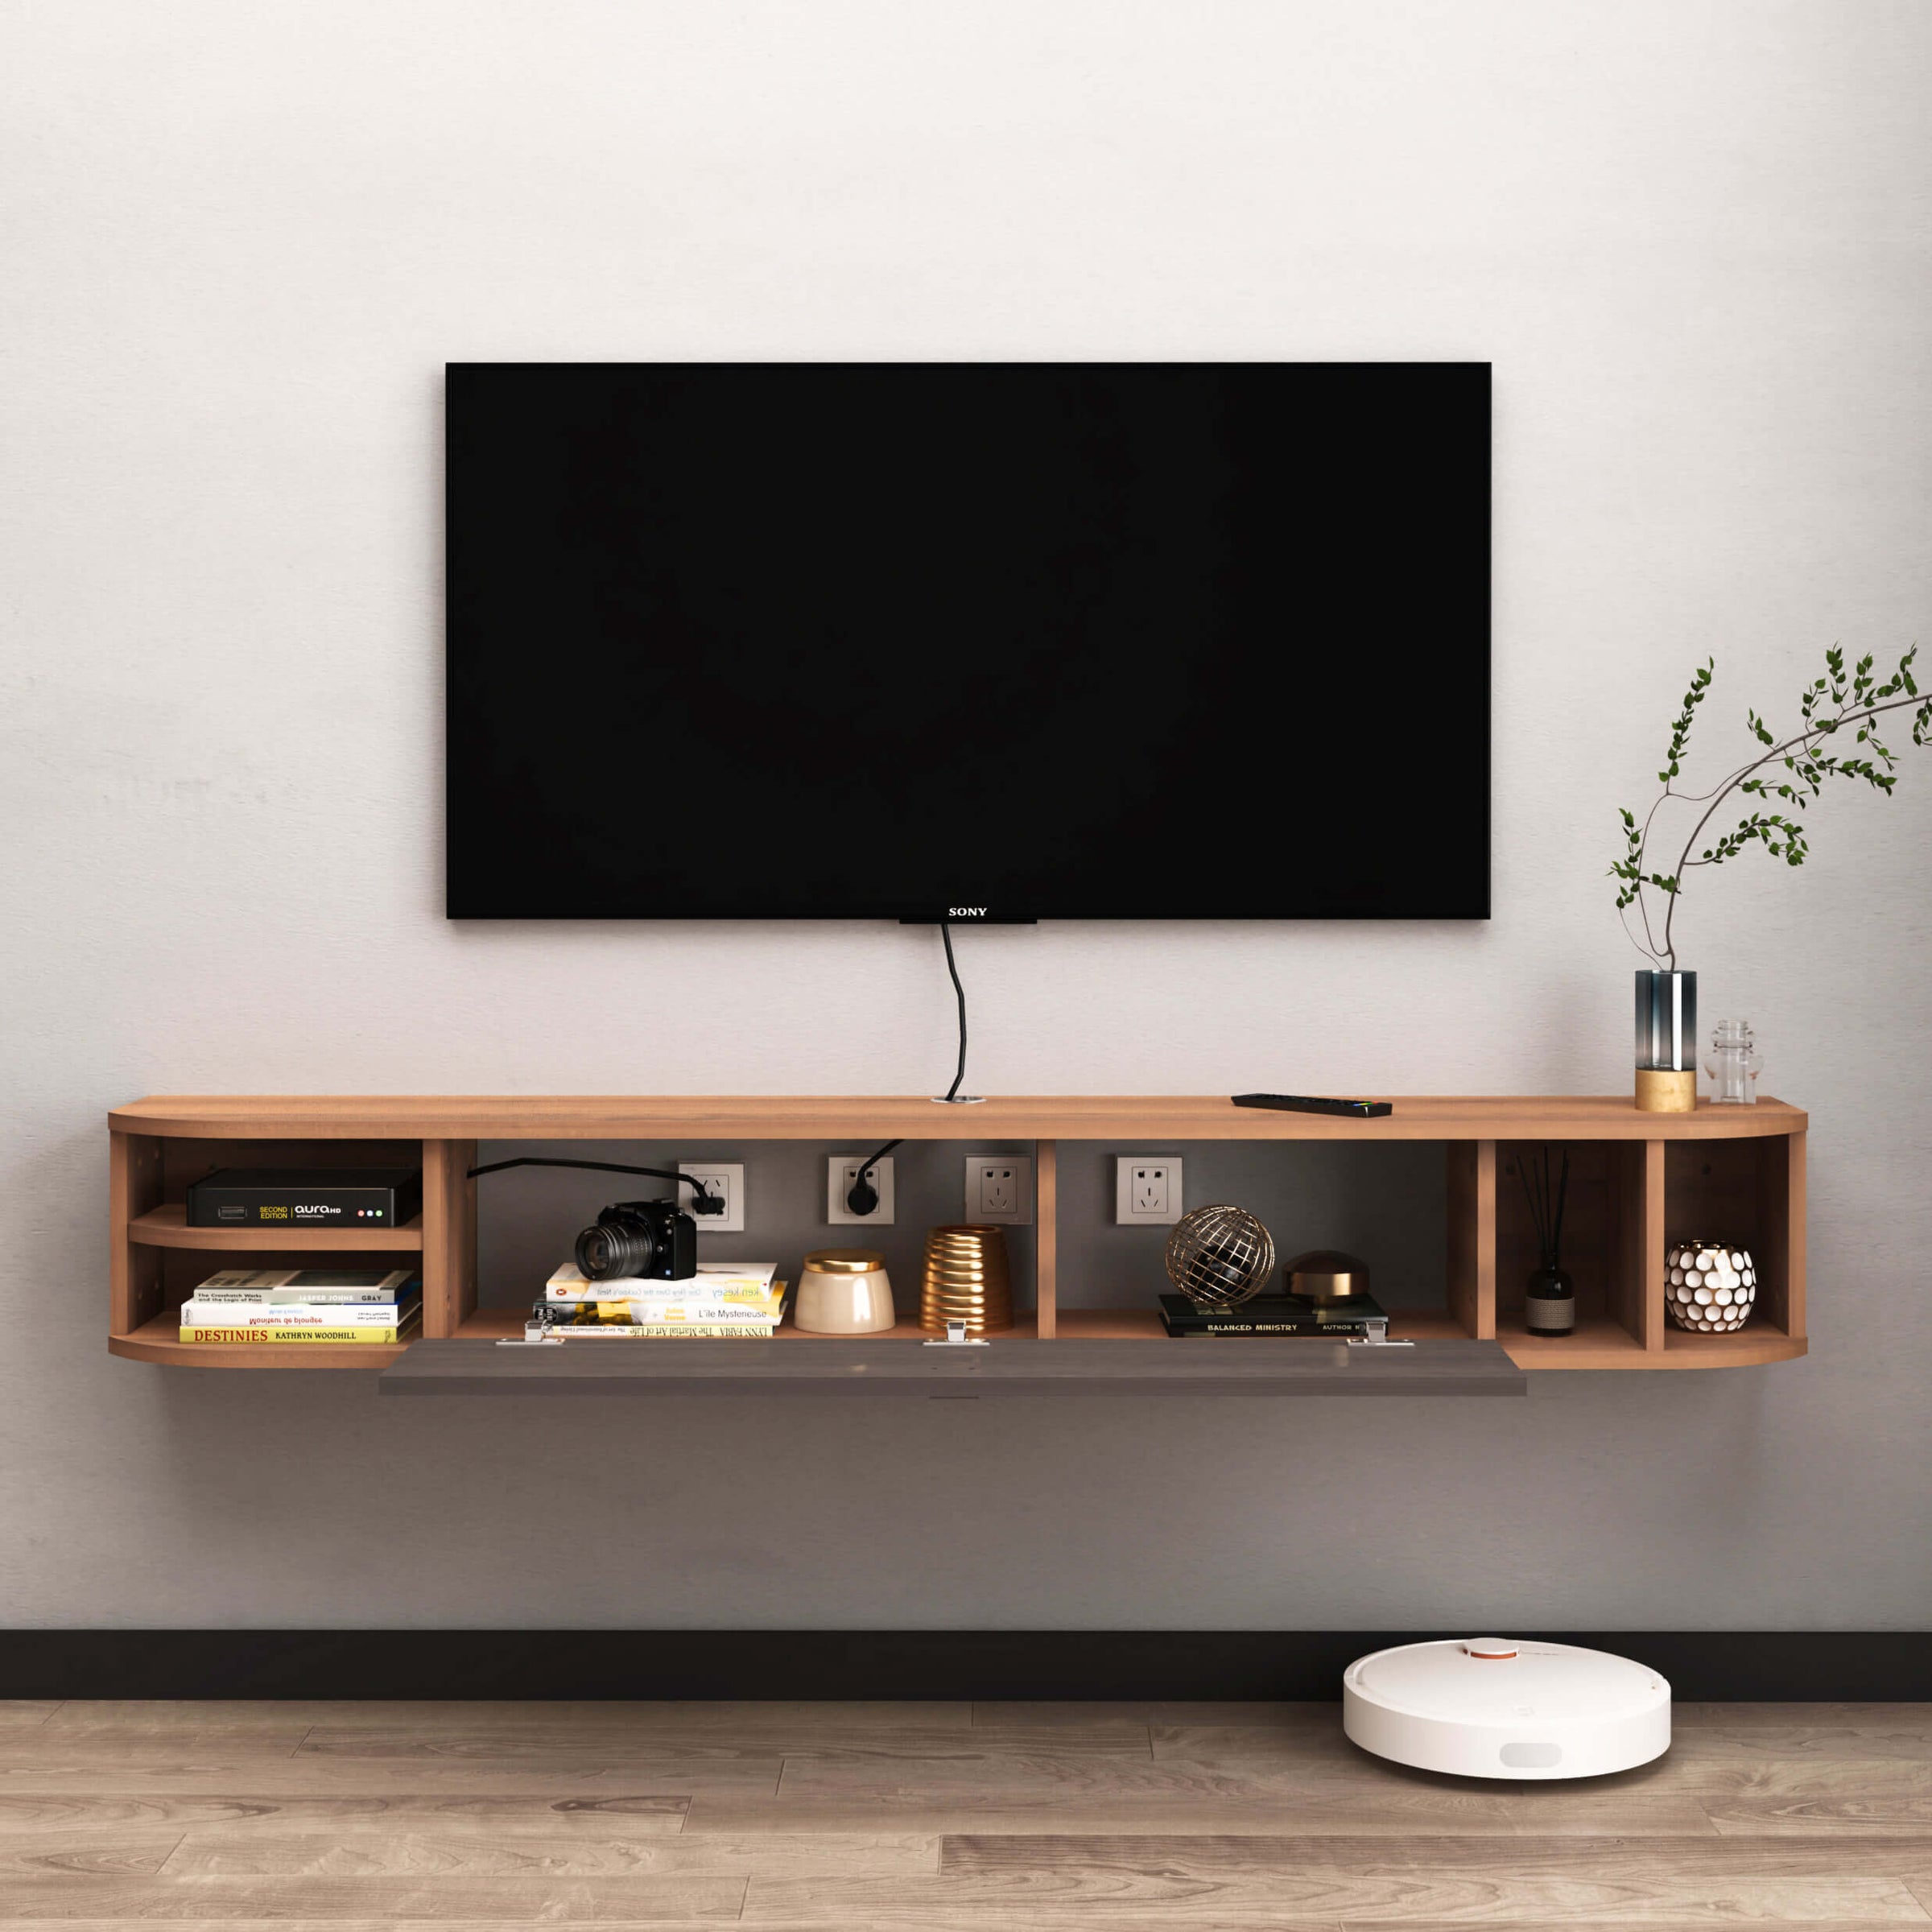 70.86" Modern Wood Floating TV Stand Shelf with Storage Cubbies for 80" TVs, Walnut